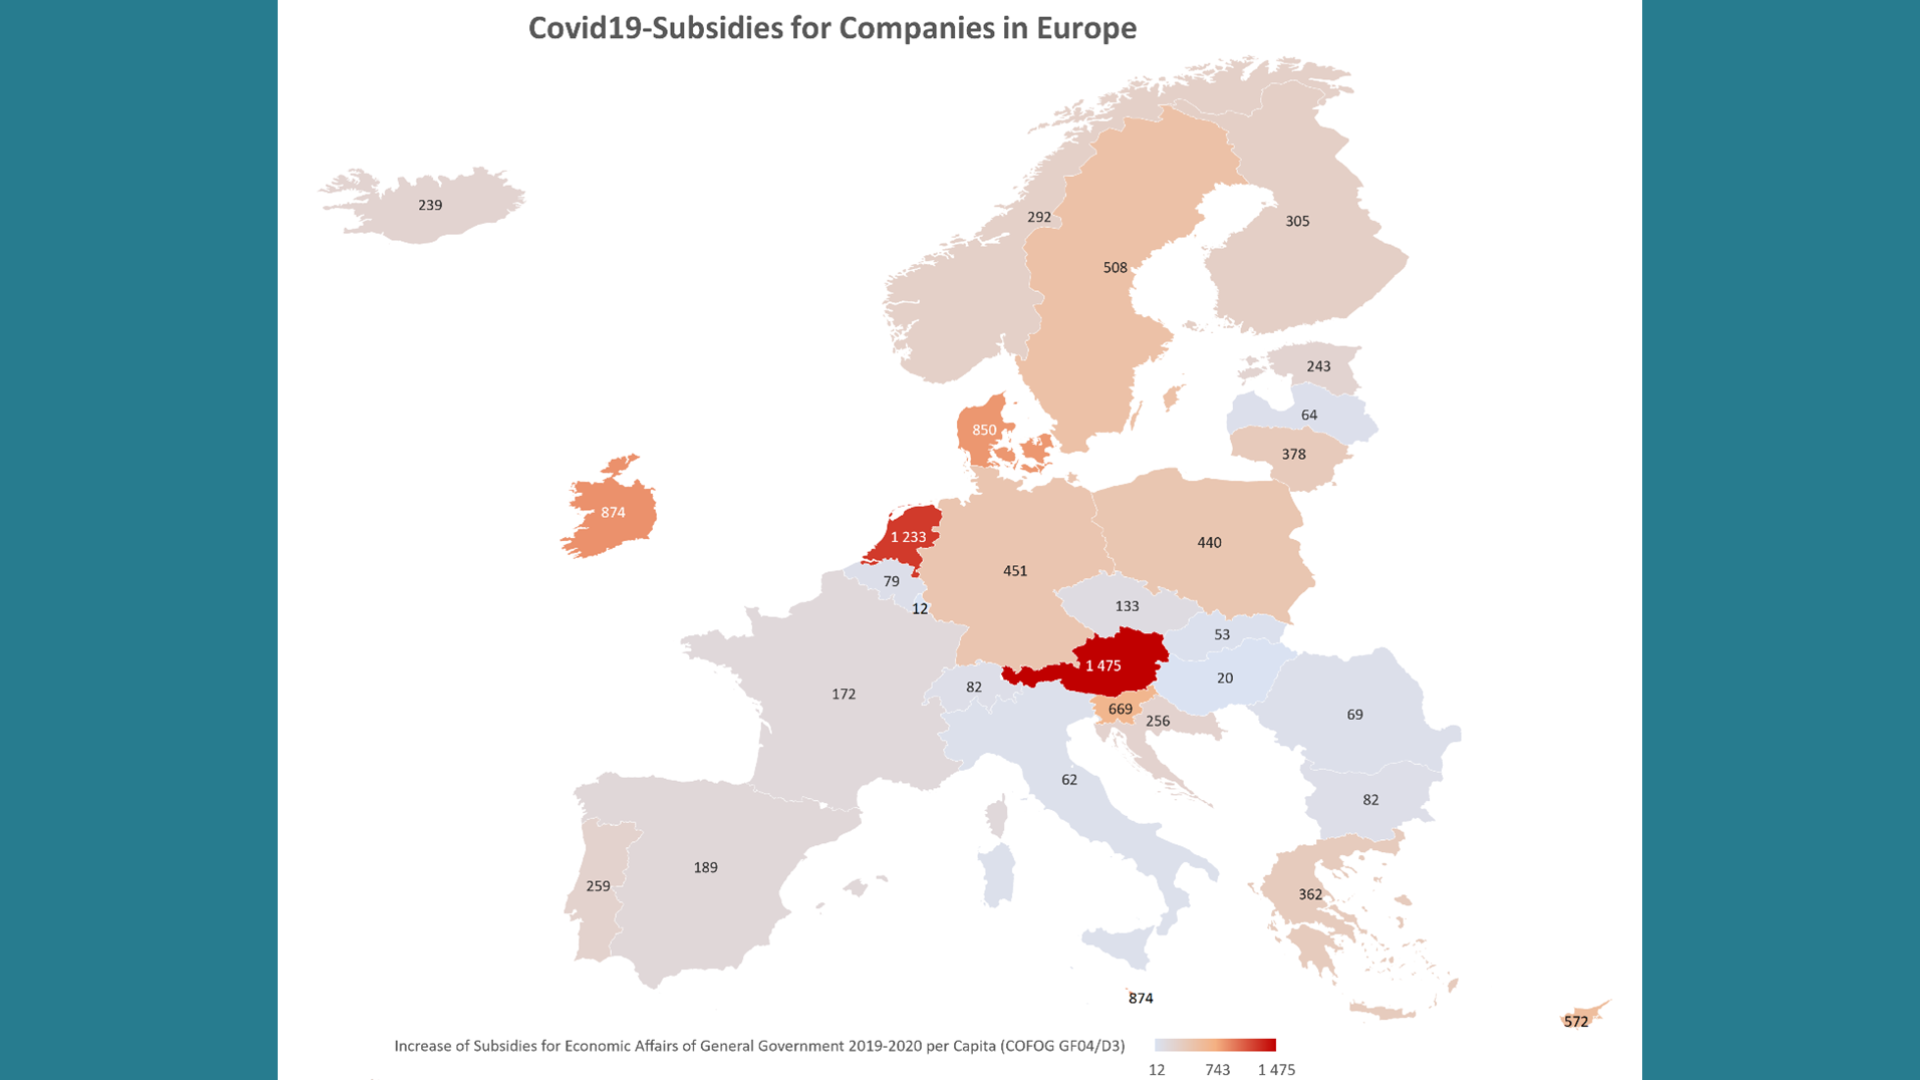 Covid19-Subsidies for businesses in Europe